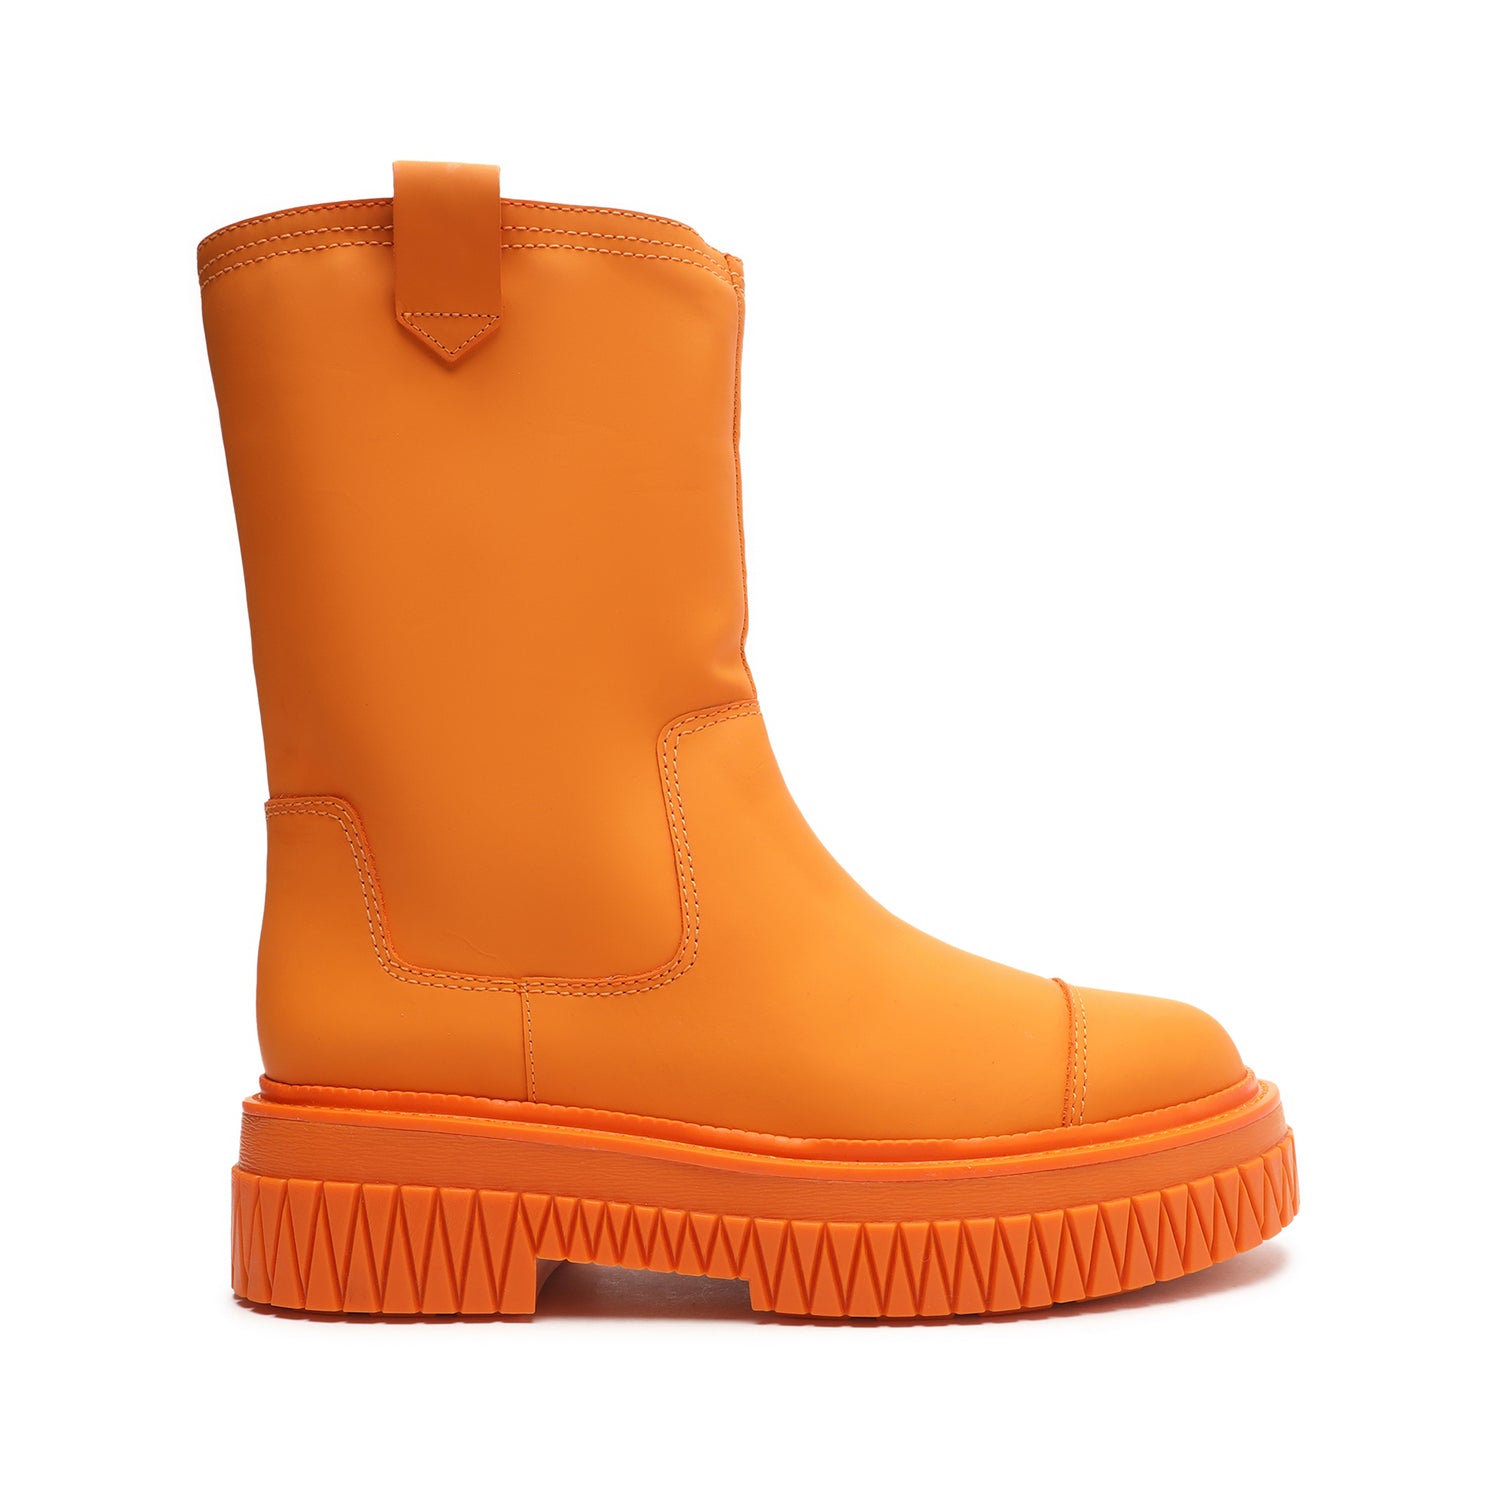 Jacy Leather Boot Boots Sale 5 Bright Tangerine Rubber Leather - Schutz Shoes